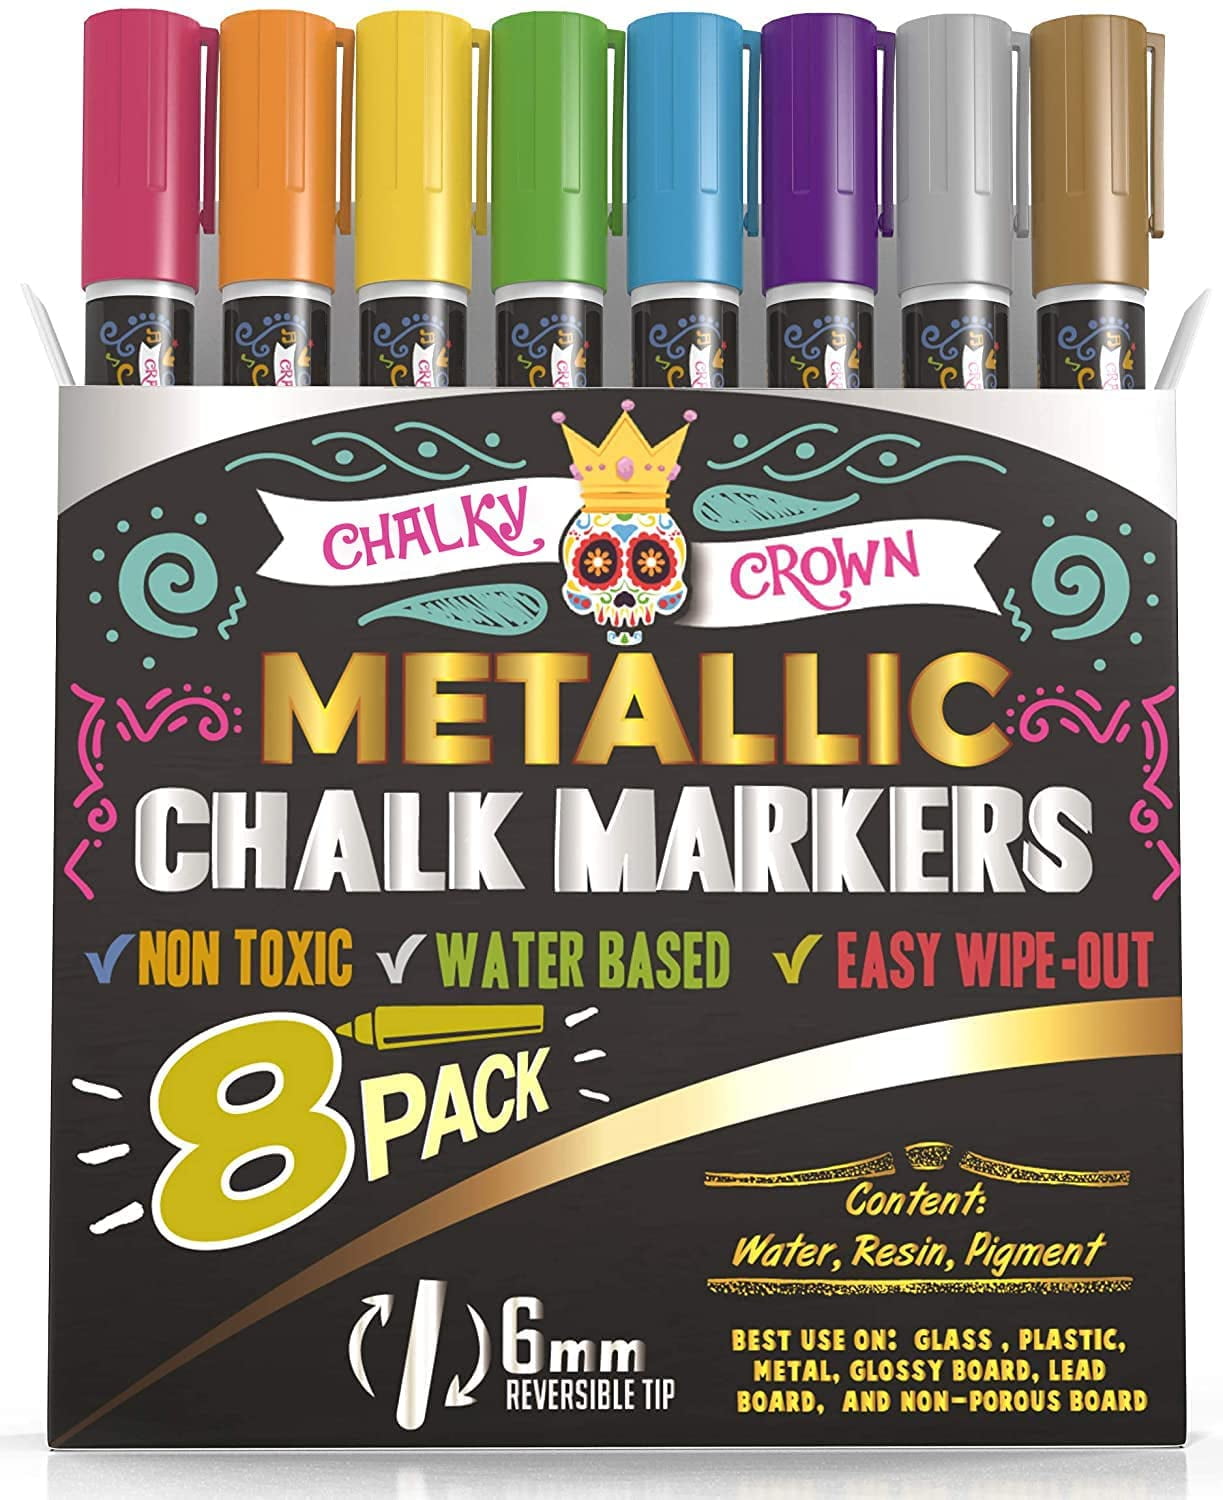  Funcils 10 Liquid Chalk Markers for Chalkboard, Windows, Glass,  Blackboard, Car, Mirror - 6mm Ink Tip Washable,Erasable, Neon Pens for Dry  Erase Chalk Board Paint : Toys & Games